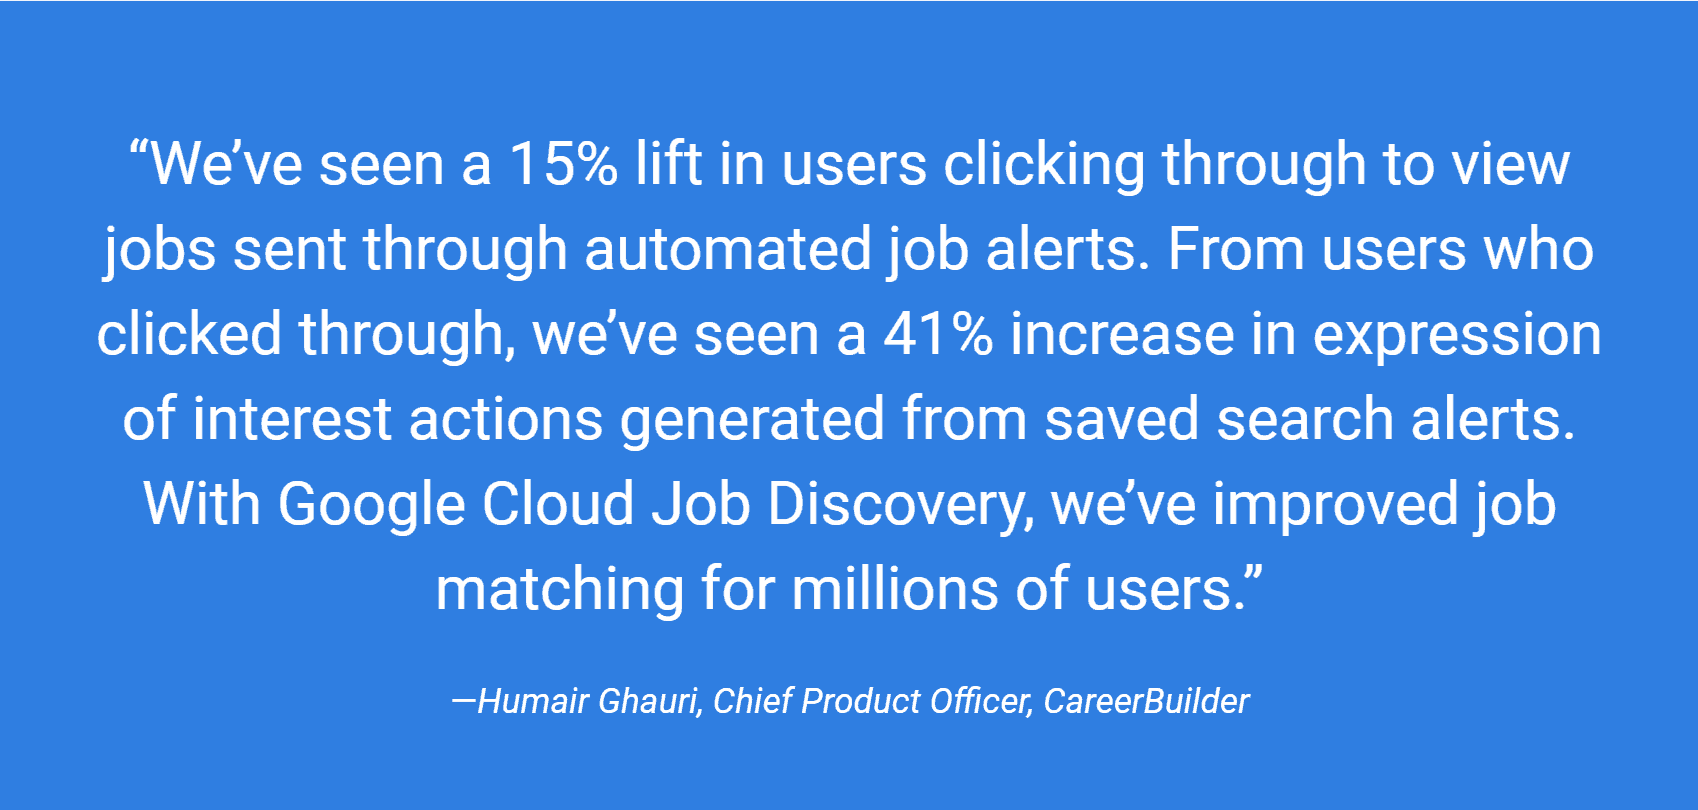 with google cloud job discovery, we’ve improved job matching for millions of users